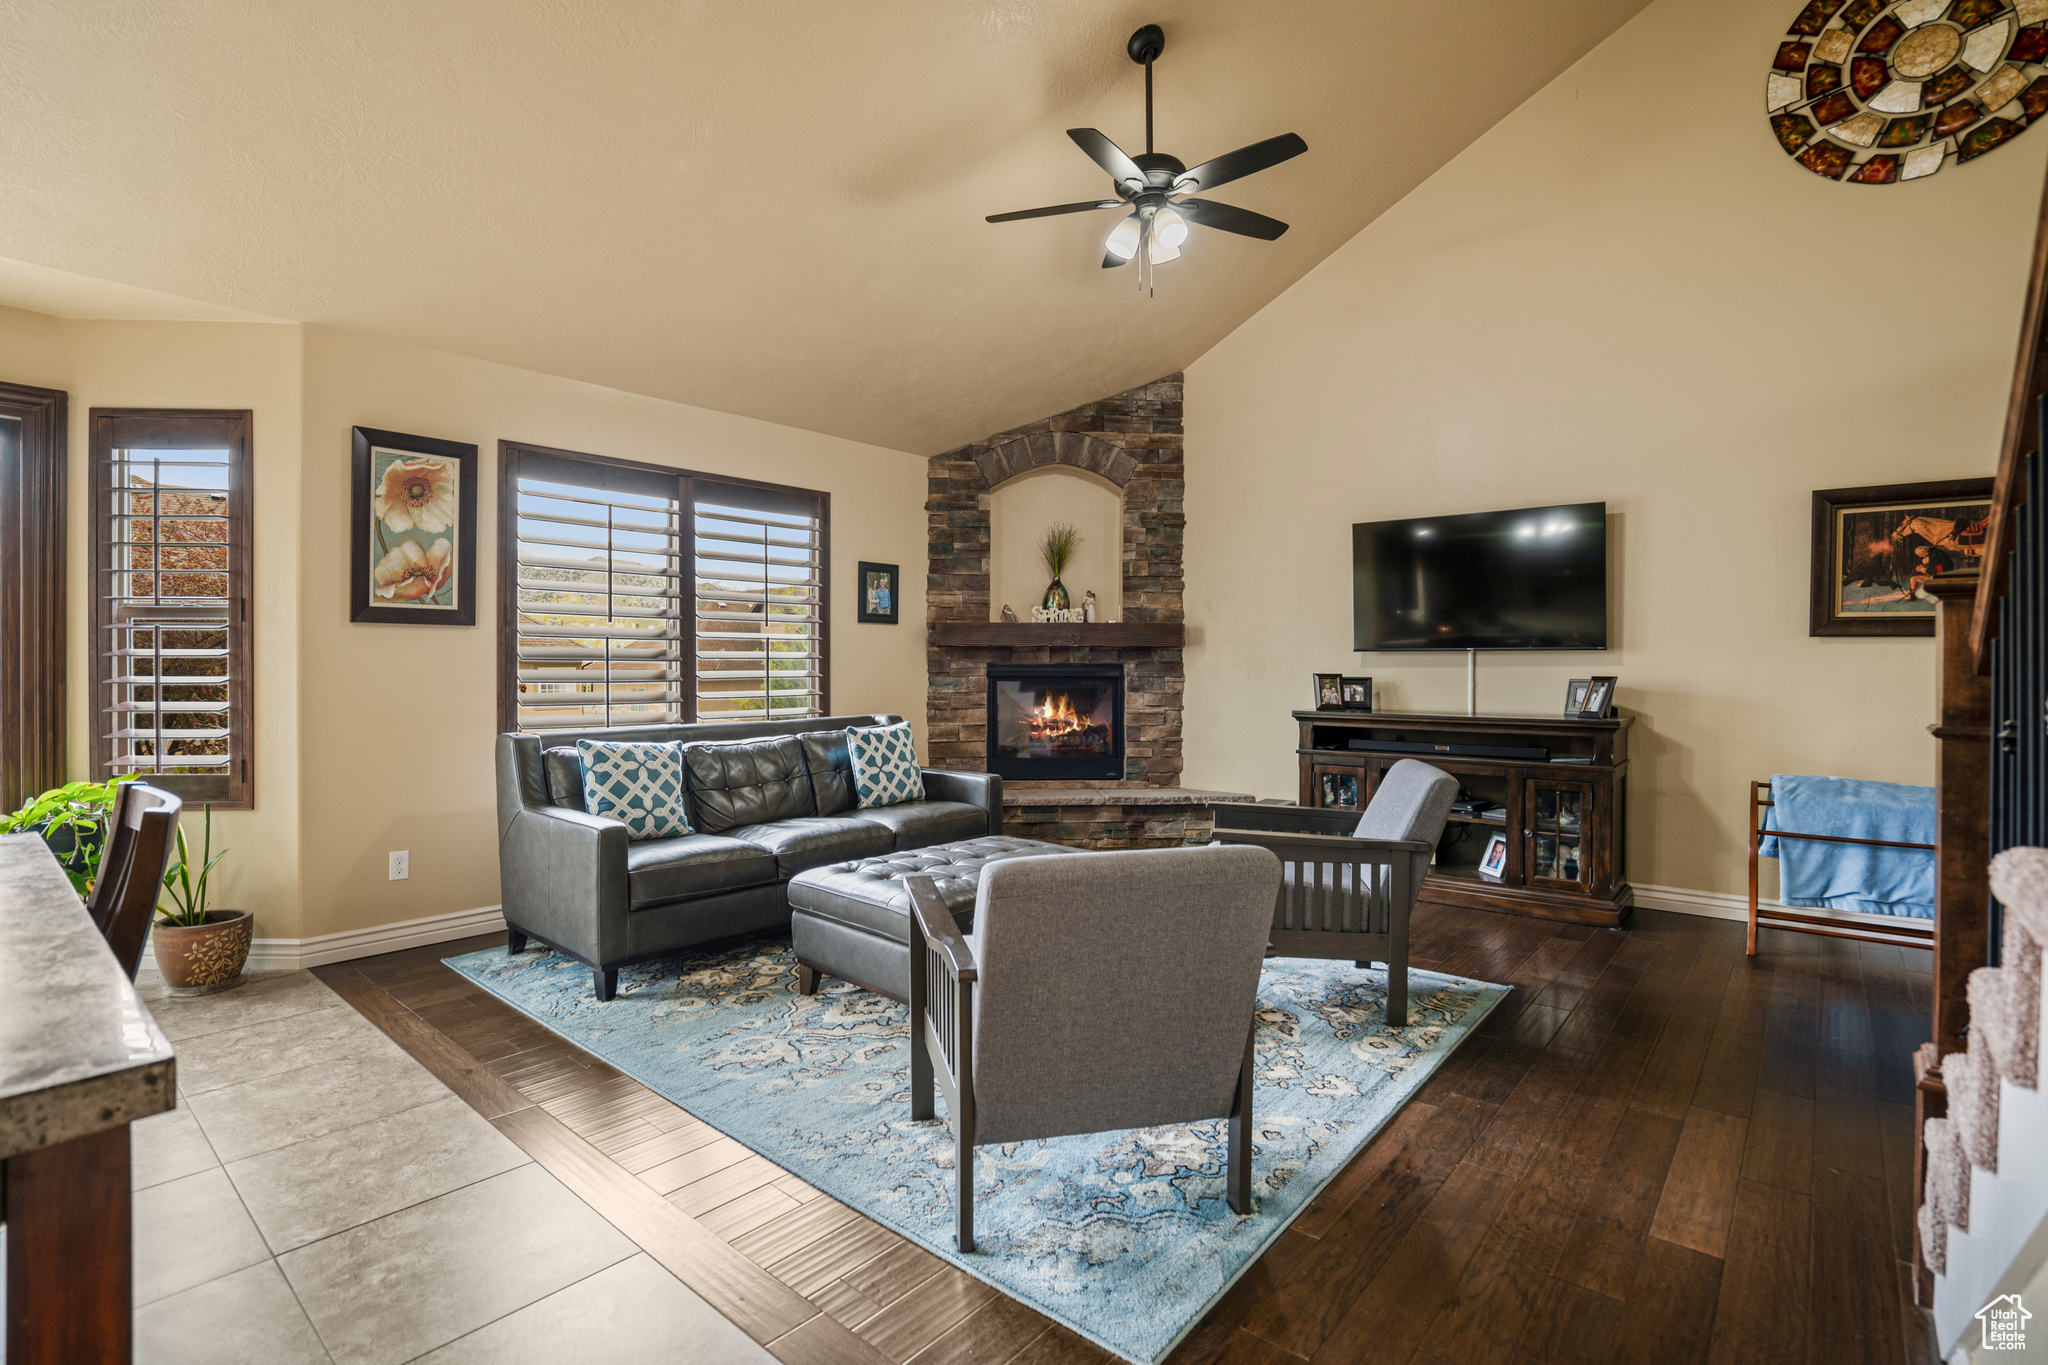 Living room featuring high vaulted ceiling, tile flooring, ceiling fan, and a fireplace